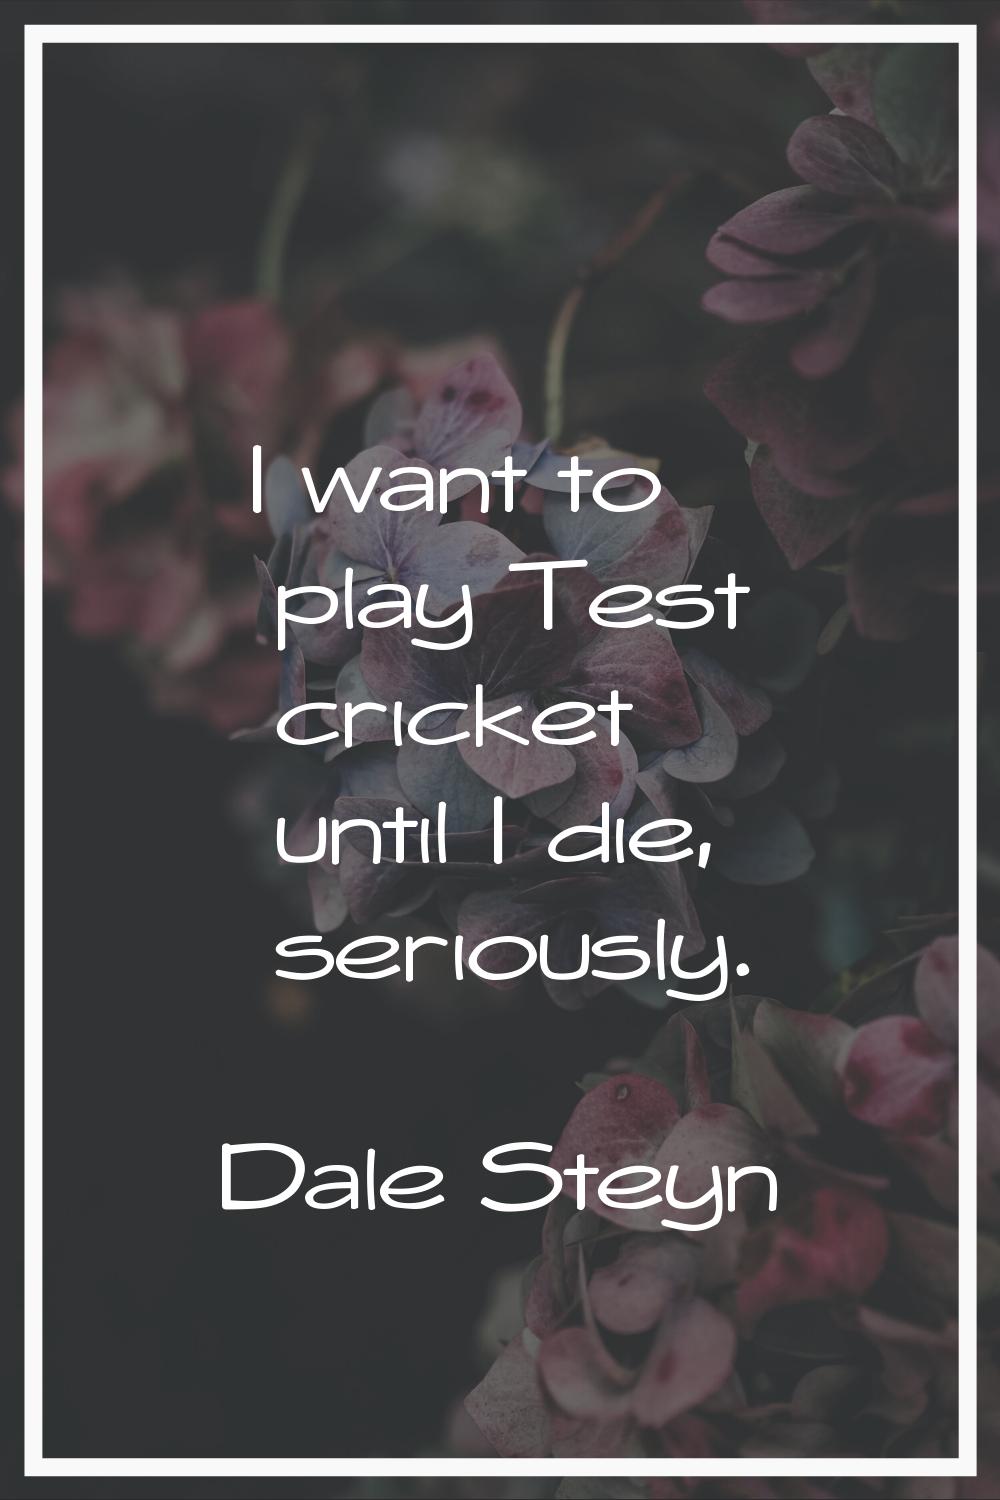 I want to play Test cricket until I die, seriously.